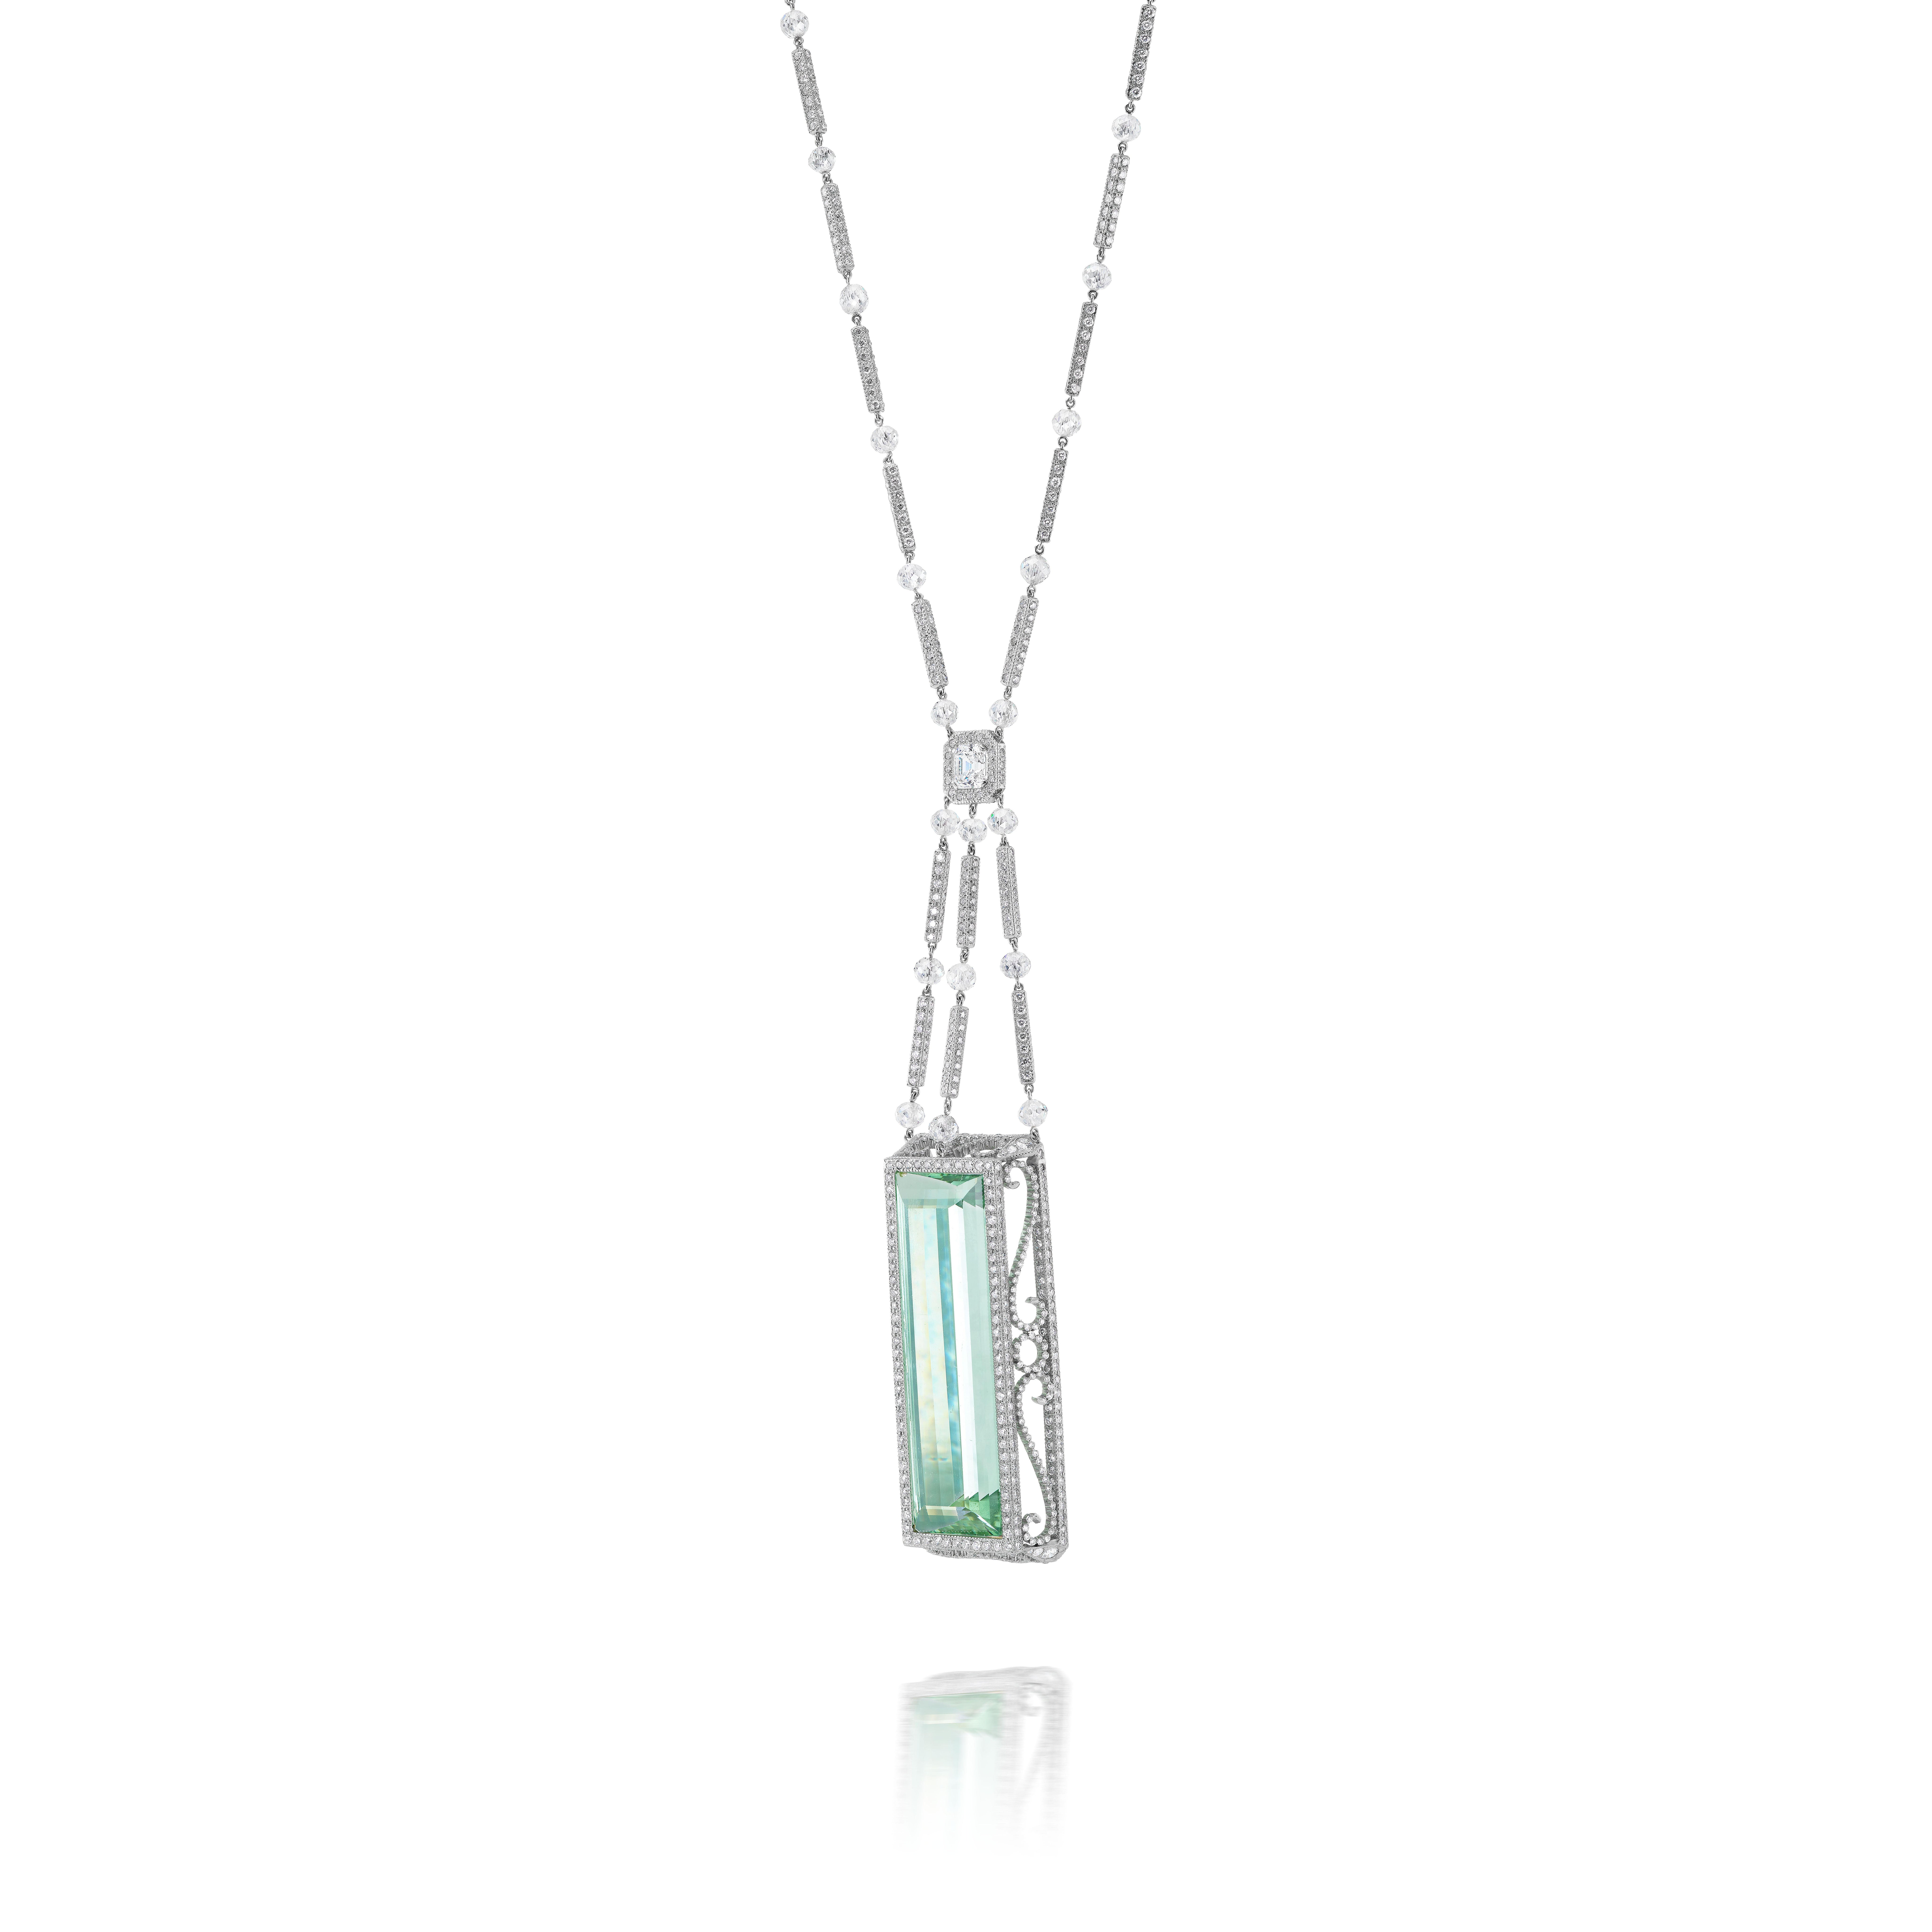 This impressive custom-crafted necklace highlights one rectangular step-cut green beryl of 65.23 carats set in a decorative box pendant, trim edged by milgraining on all four sides in extraordinary detail and micro pavé set with a total of 465 round